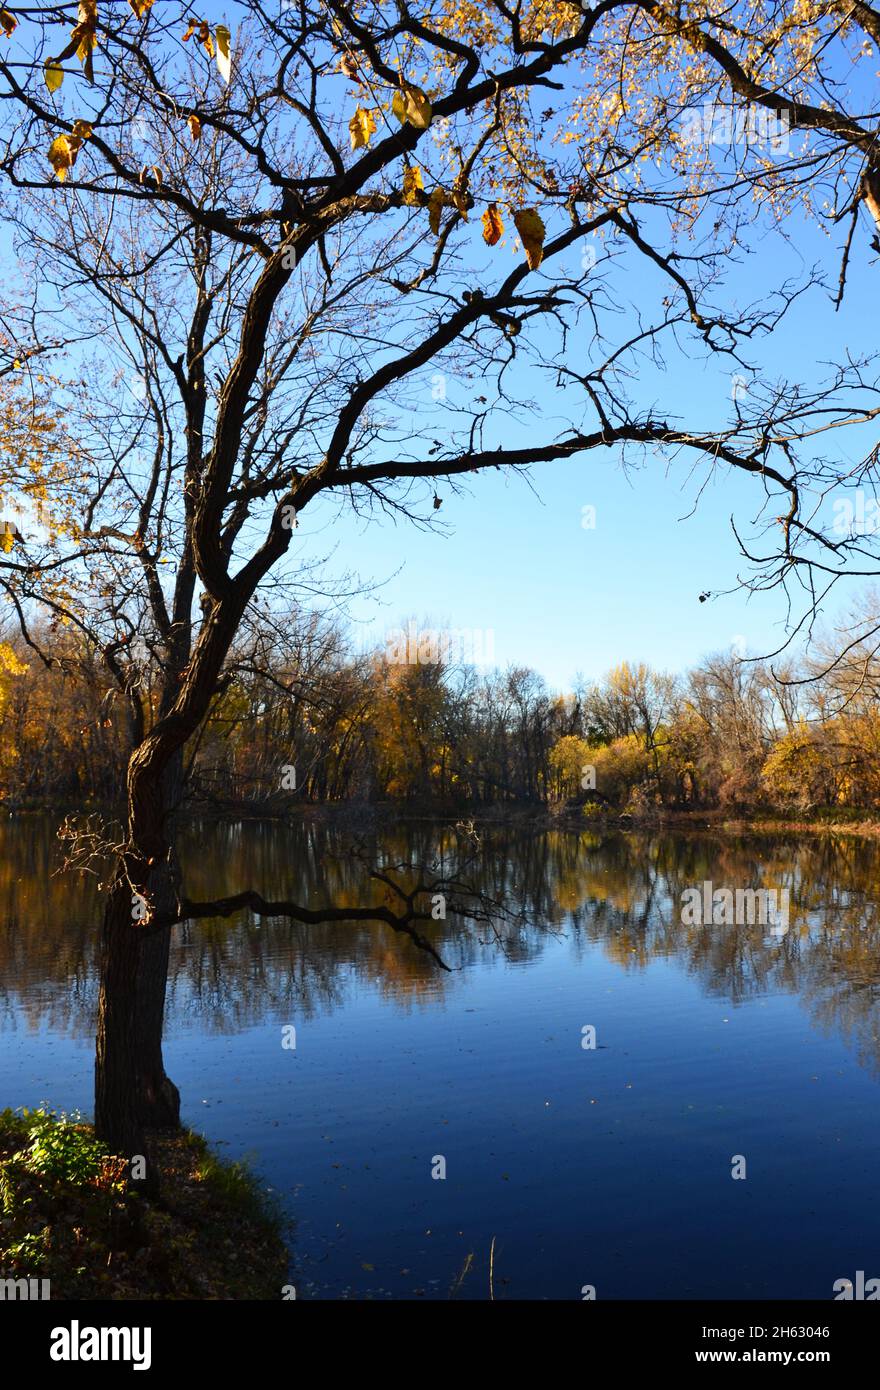 Colorful autumn landscape with a lake Stock Photo